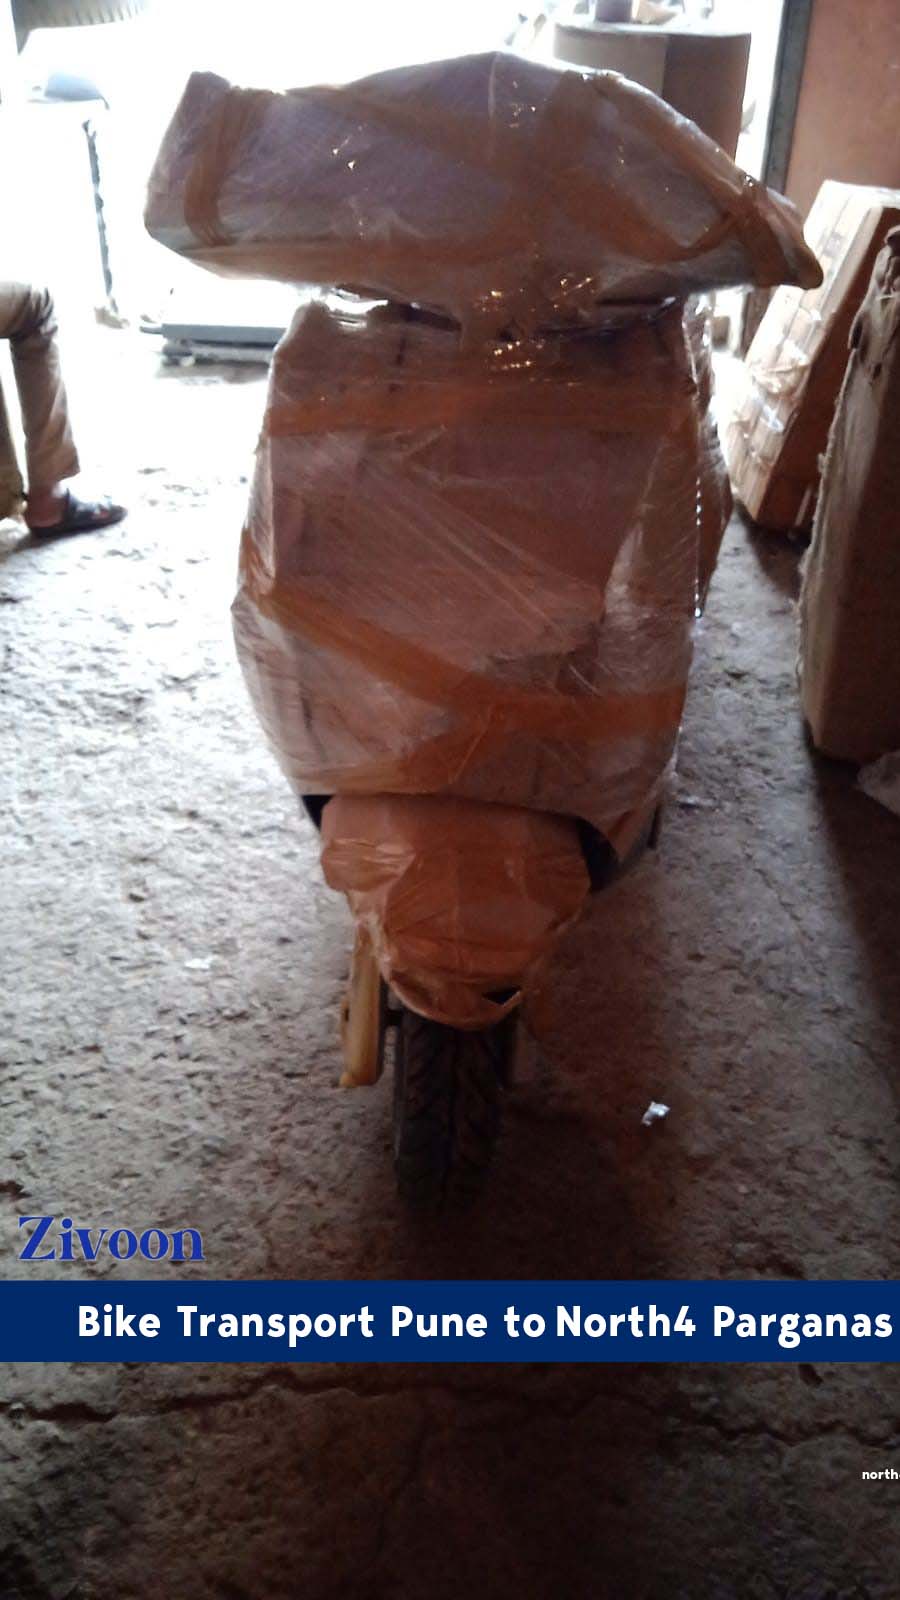 Bike Packers and Movers Pune to North4 Parganas